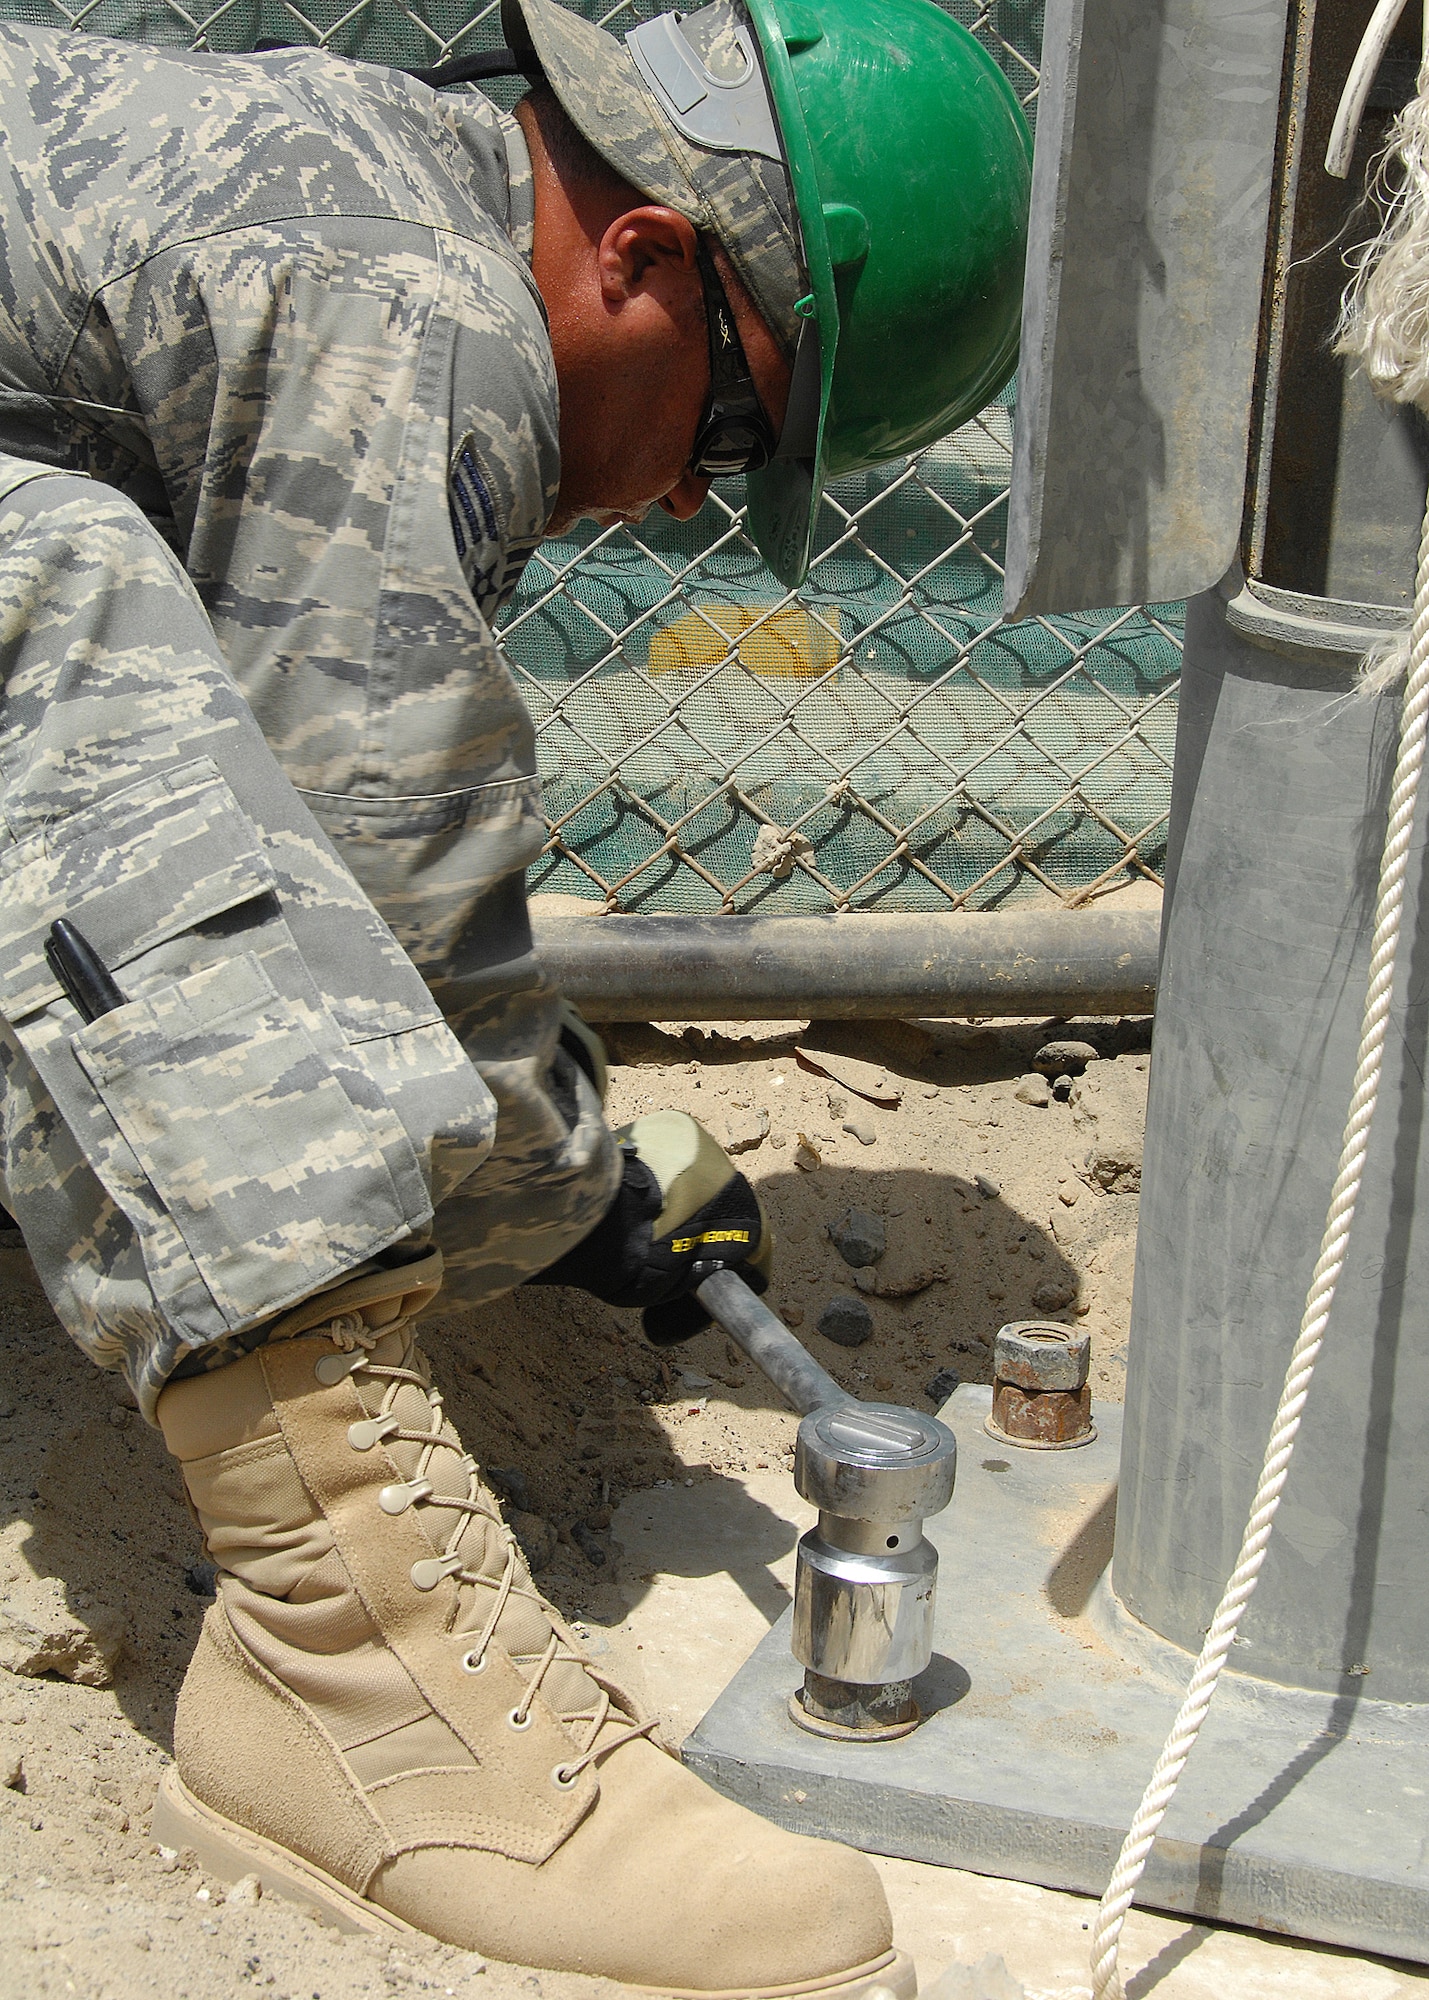 SOUTHWEST ASIA -- Senior Airman Jose Lozadacosme, assigned to the 386th Expeditionary Civil Engineer Squadron, tightens down bolts on the base of a light pole on Aug. 23 at an air base in Southwest Asia. The 386th ECES installed four new light poles on the Republic of Korea Air Force compound because of previous wind damage to the poles. The installation was a joint effort between U.S. and Korean Airmen. Airman Lozadacosme is deployed from the Puerto Rico Air National Guard. (U.S. Air Force photo/Tech. Sgt. Raheem Moore)